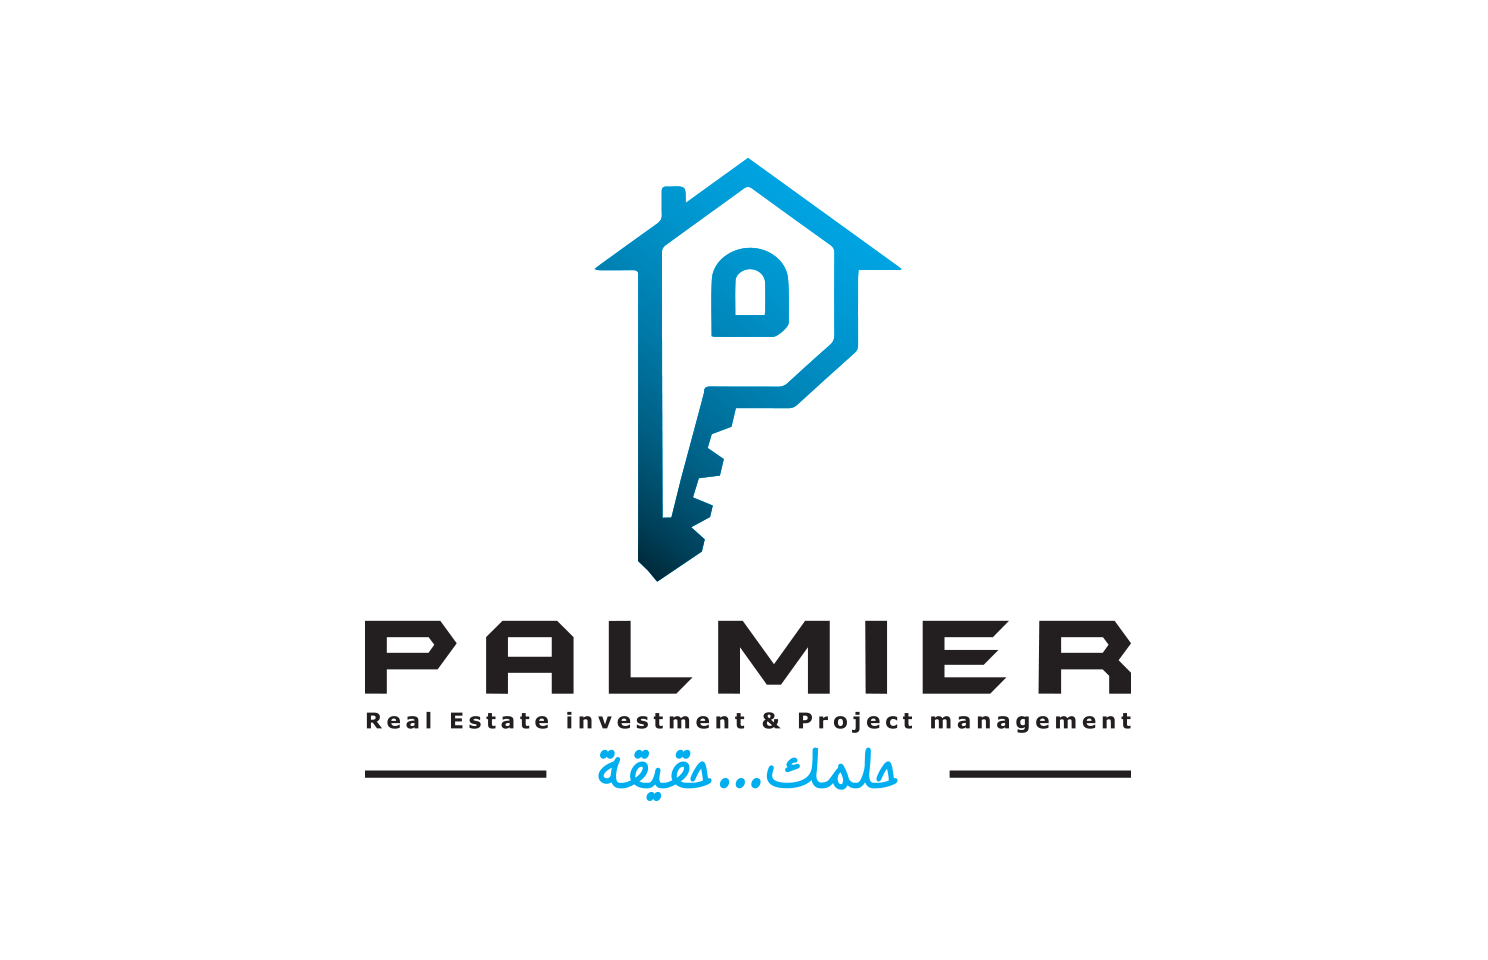 Palmier Real Estate Investment & Project Management